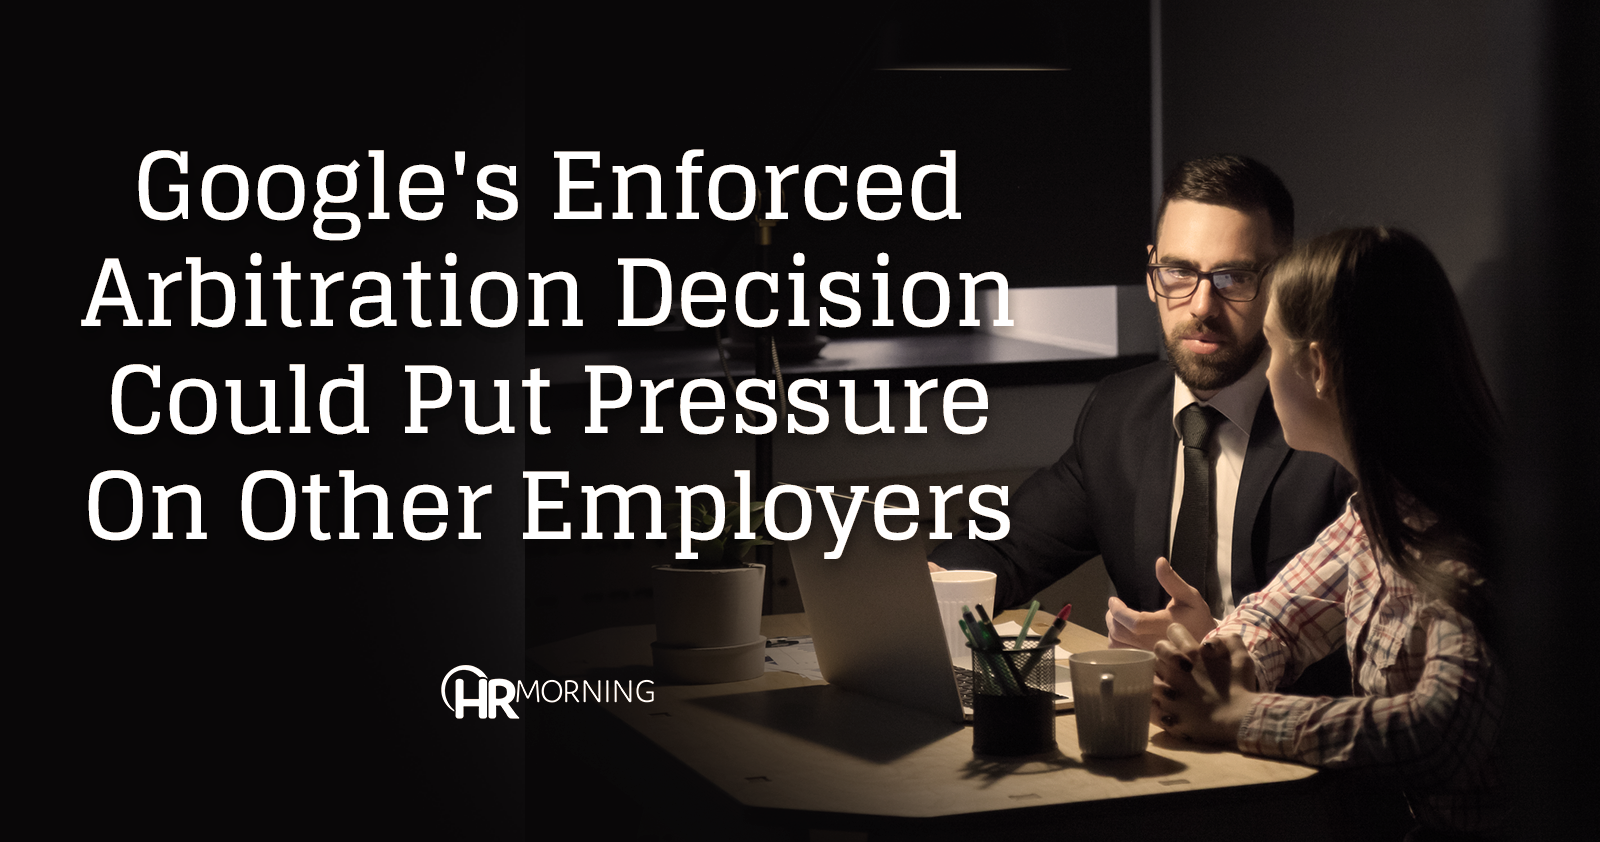 Google's enforced arbitration decision could put pressure on other employers